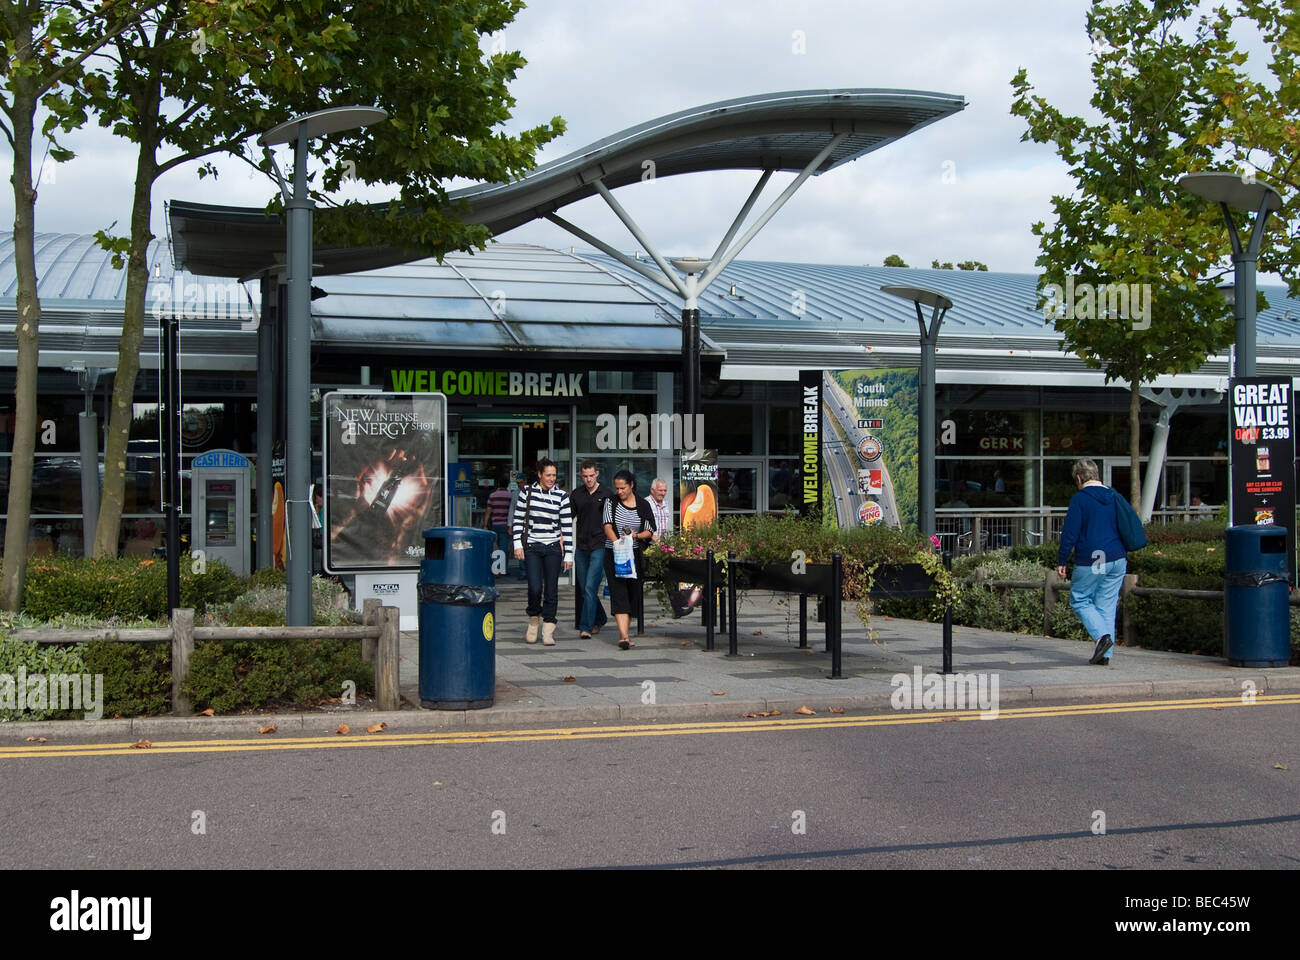 The South Mimms service station on the M25 motorway. Operated by Welcome Break (September 2009) Stock Photo